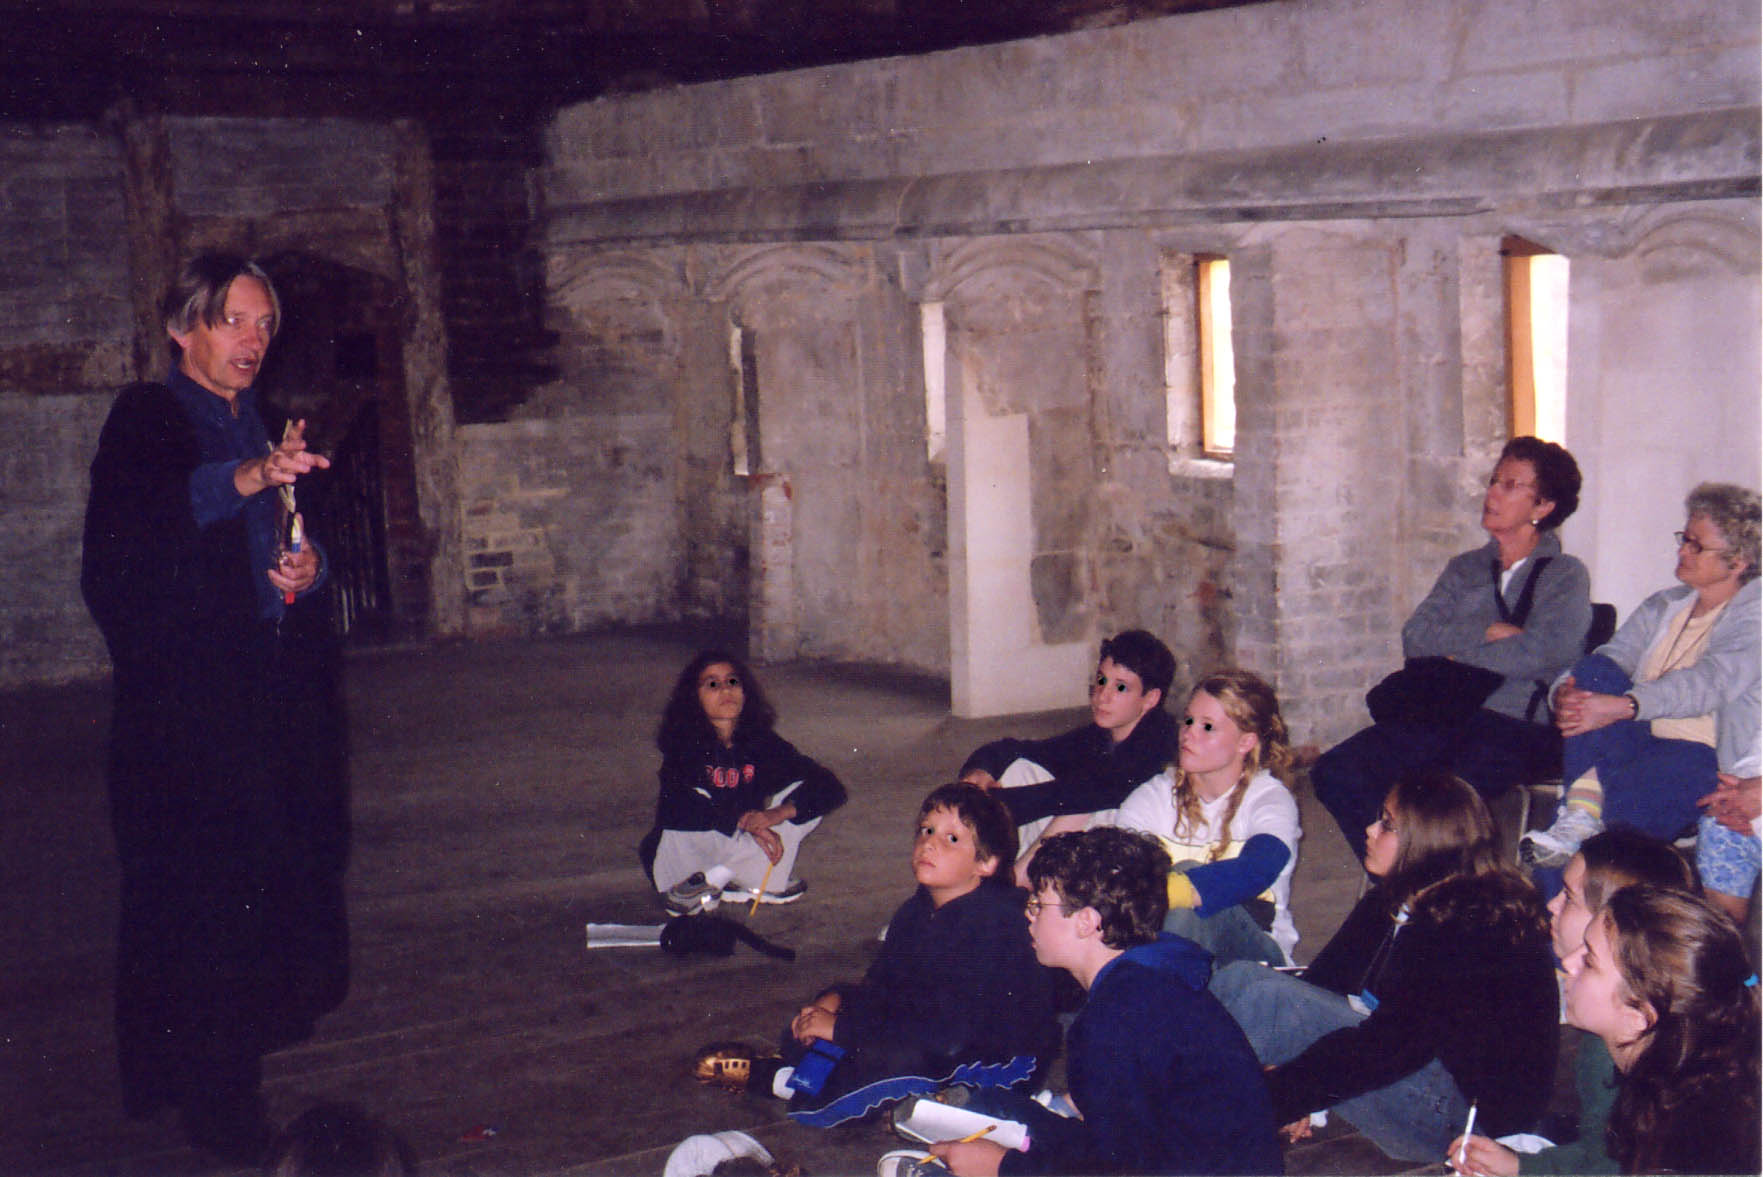 John standing in black academic gown gesturing and declaiming to a group of children seated on the ground in a hall which forms part of an ancient monastery, edged with battered stone buttresses which have been partially restored with plaster